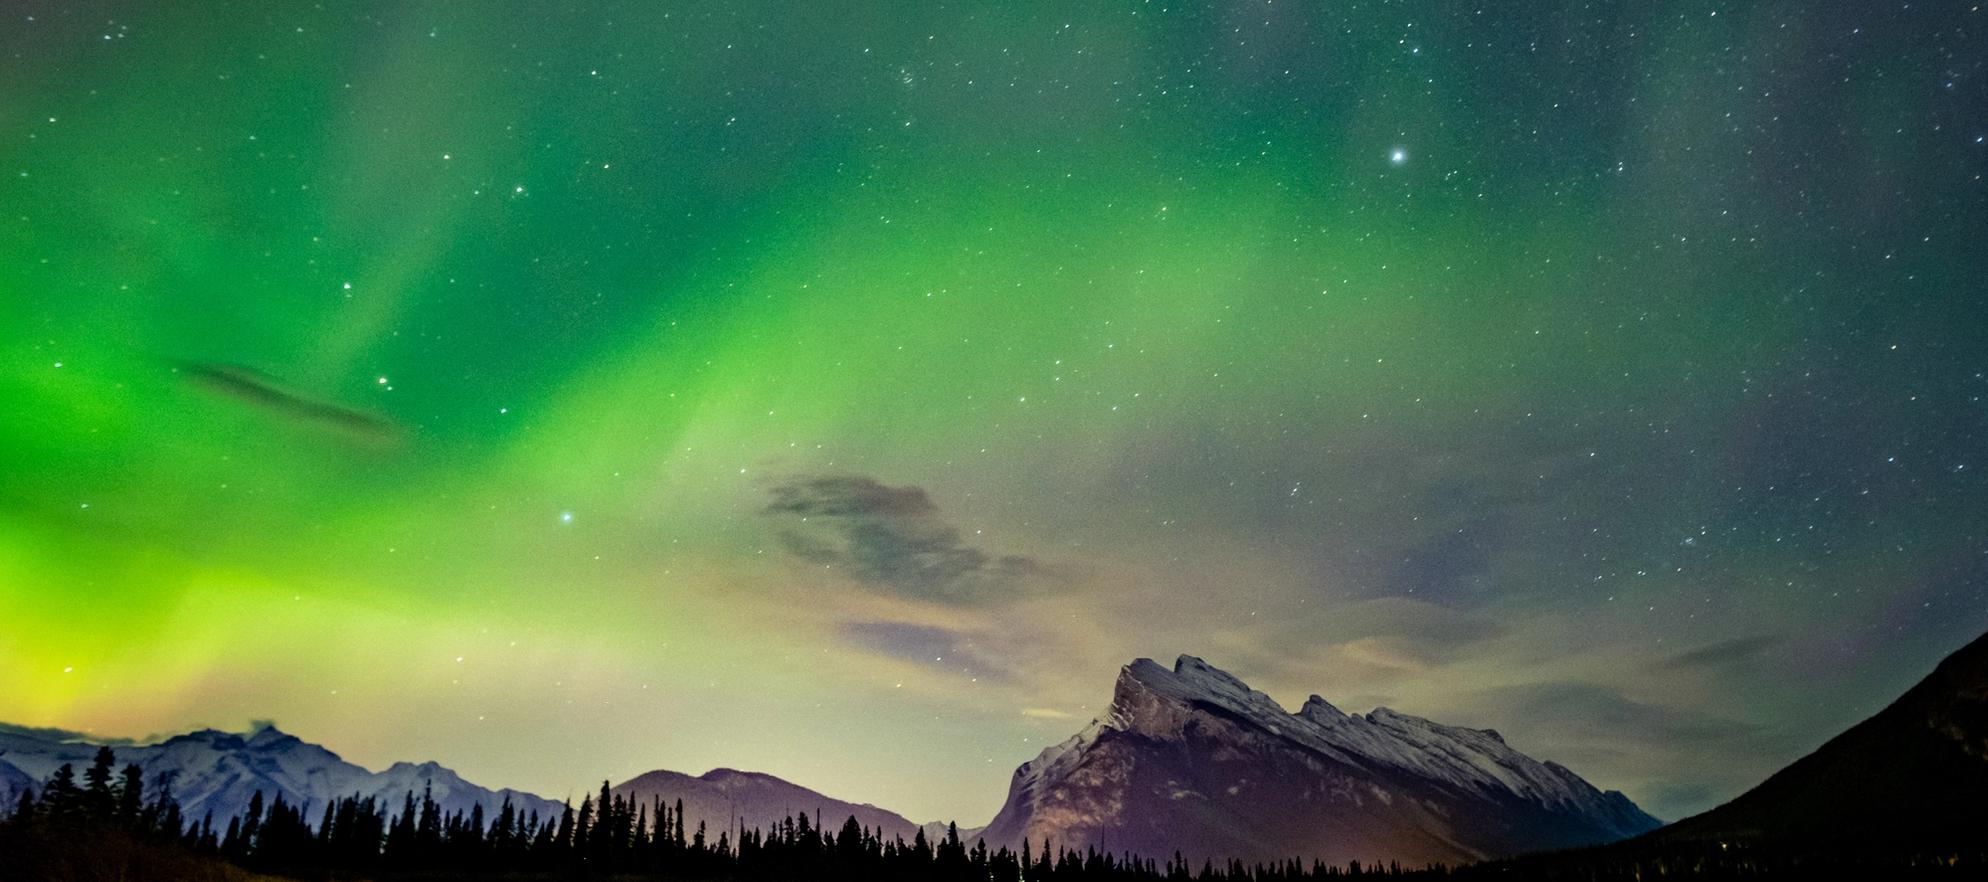 Green aurora and starts glow over Mount Rundle with Vermilion Lakes below